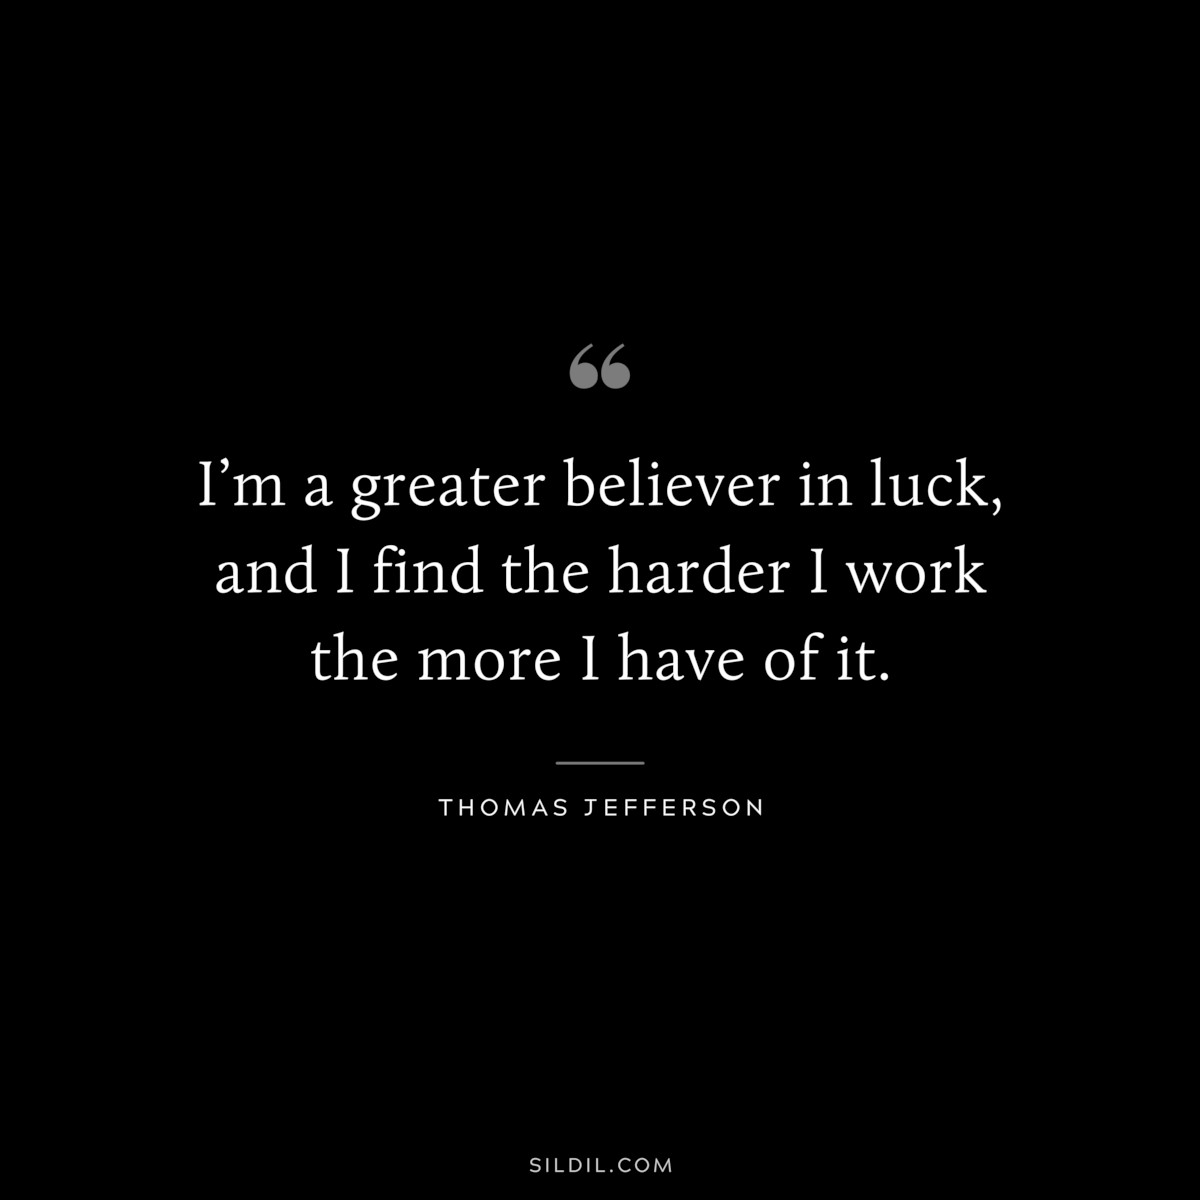 I’m a greater believer in luck, and I find the harder I work the more I have of it. ― Thomas Jefferson